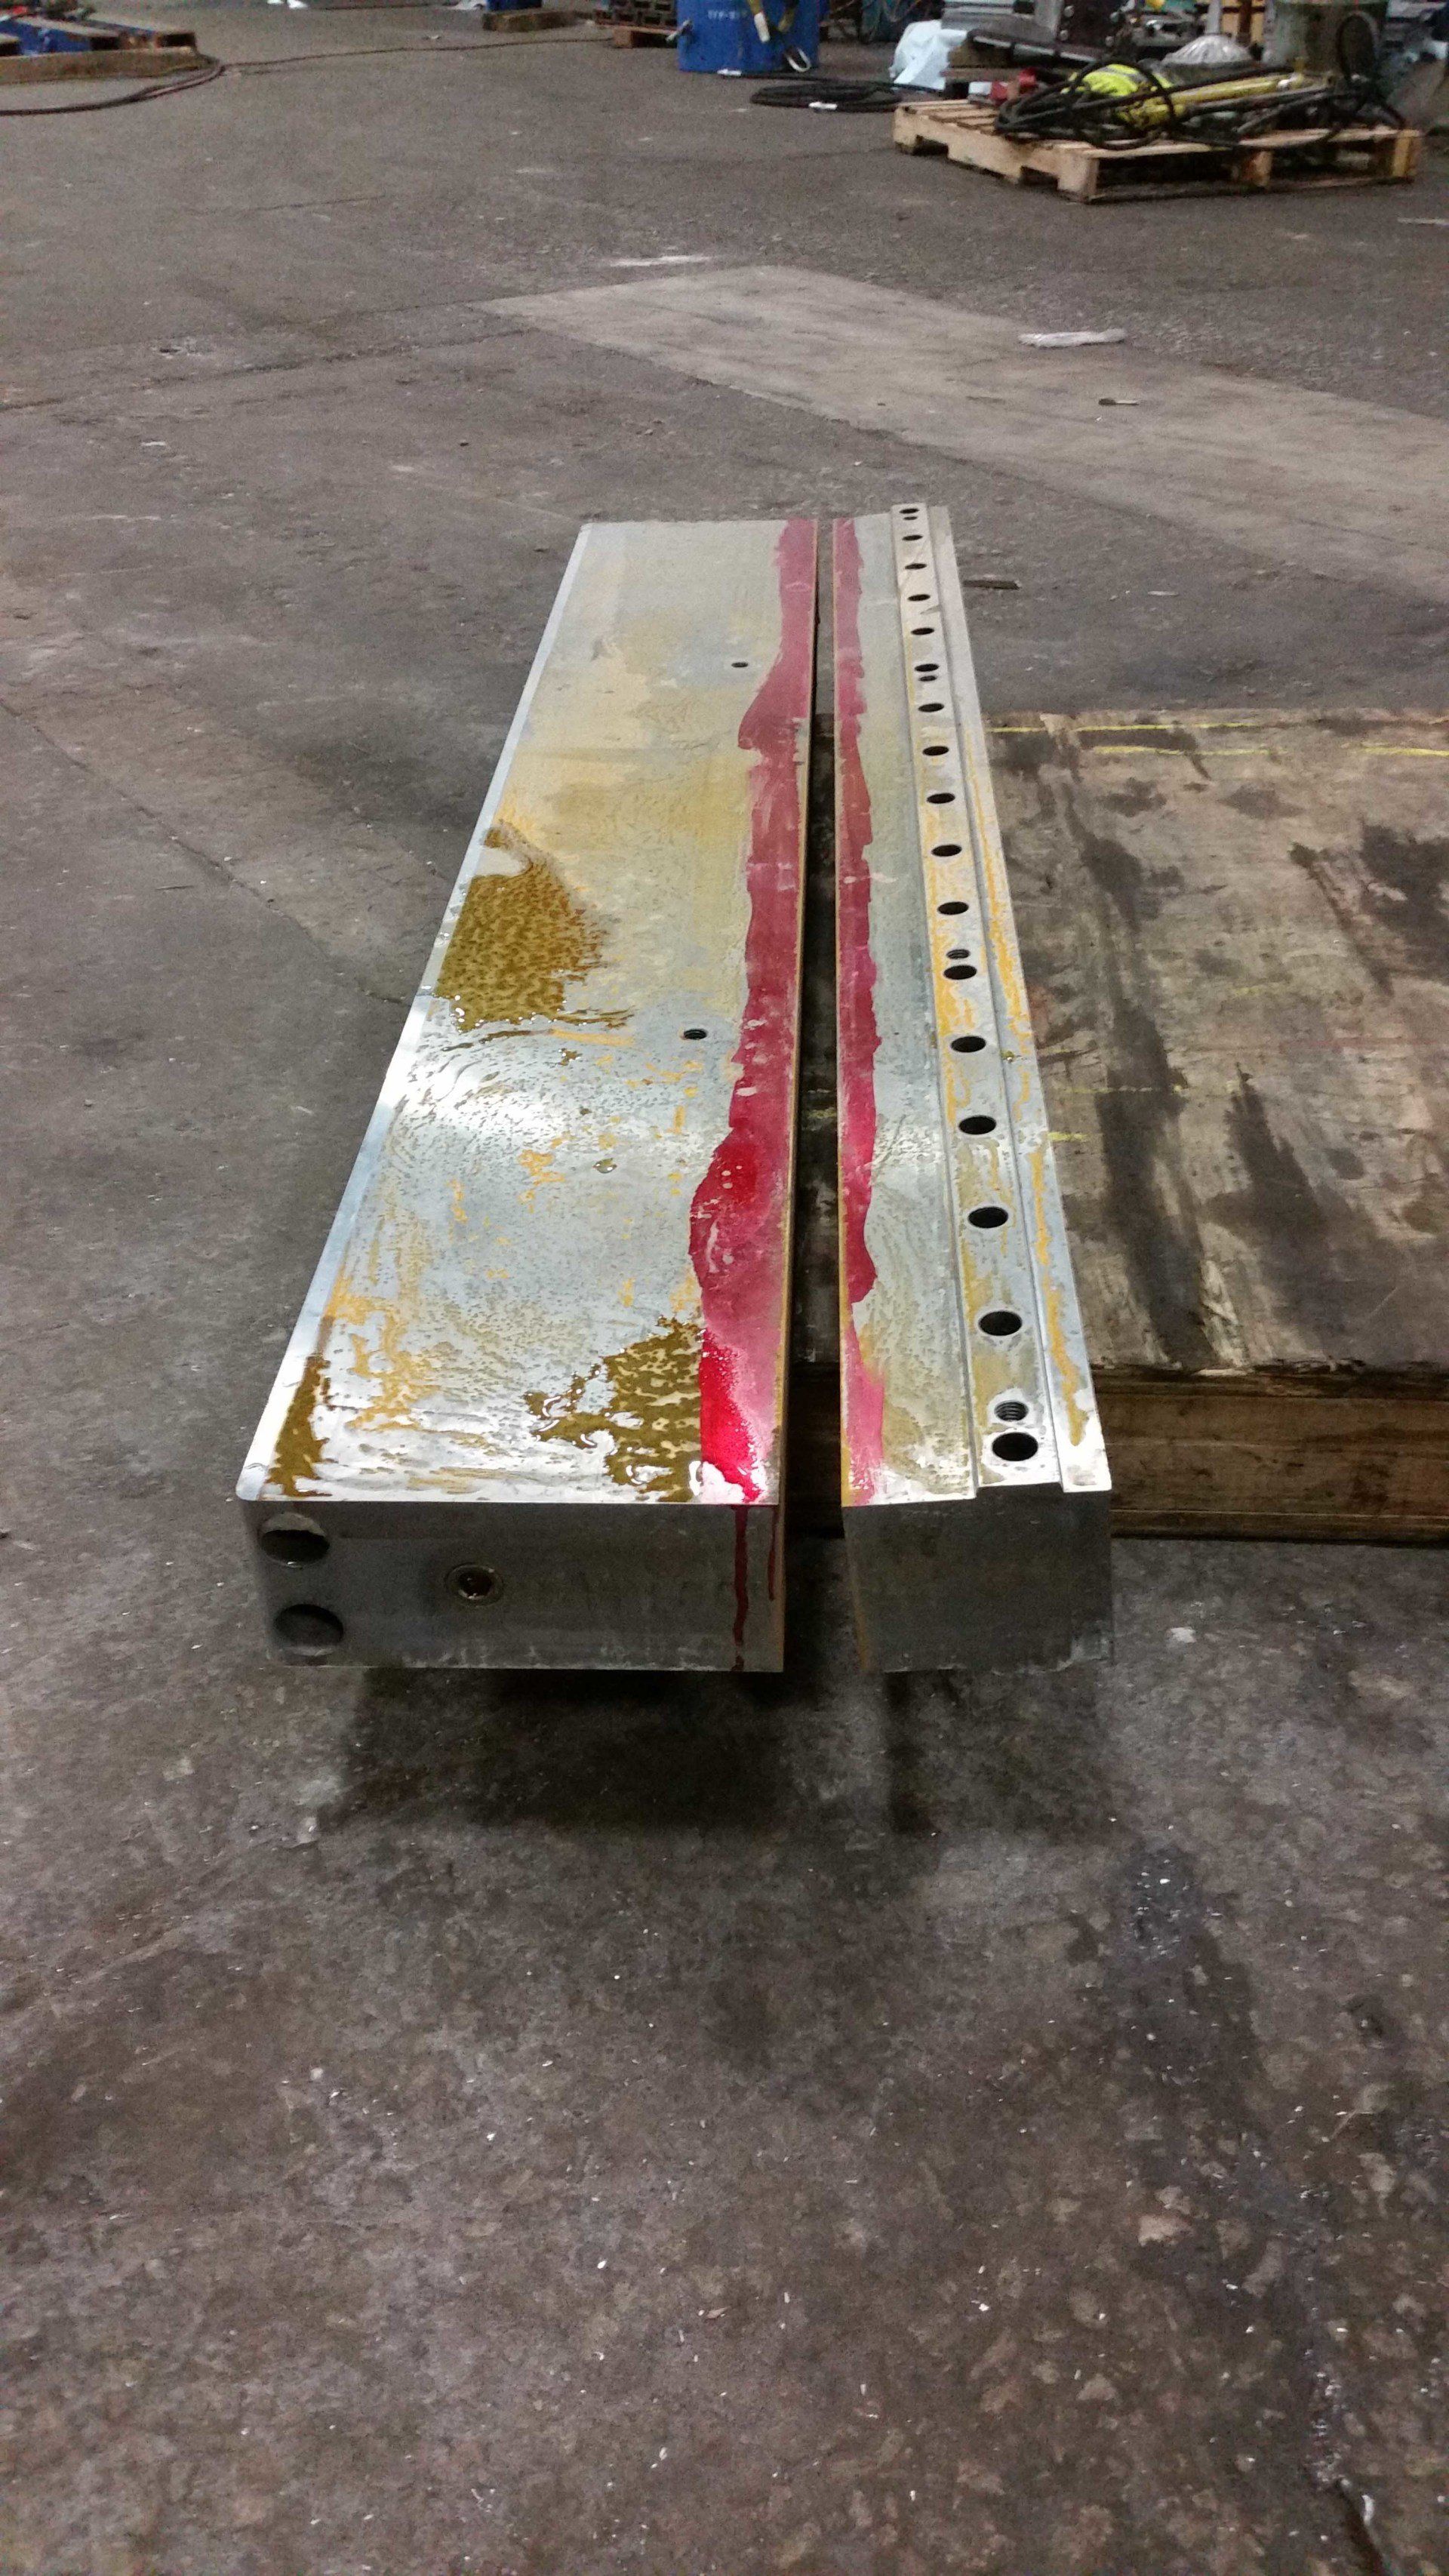 3 Inch thick hardened steel fixture ripped edge off - Custom Cutting in East Chicago, IN